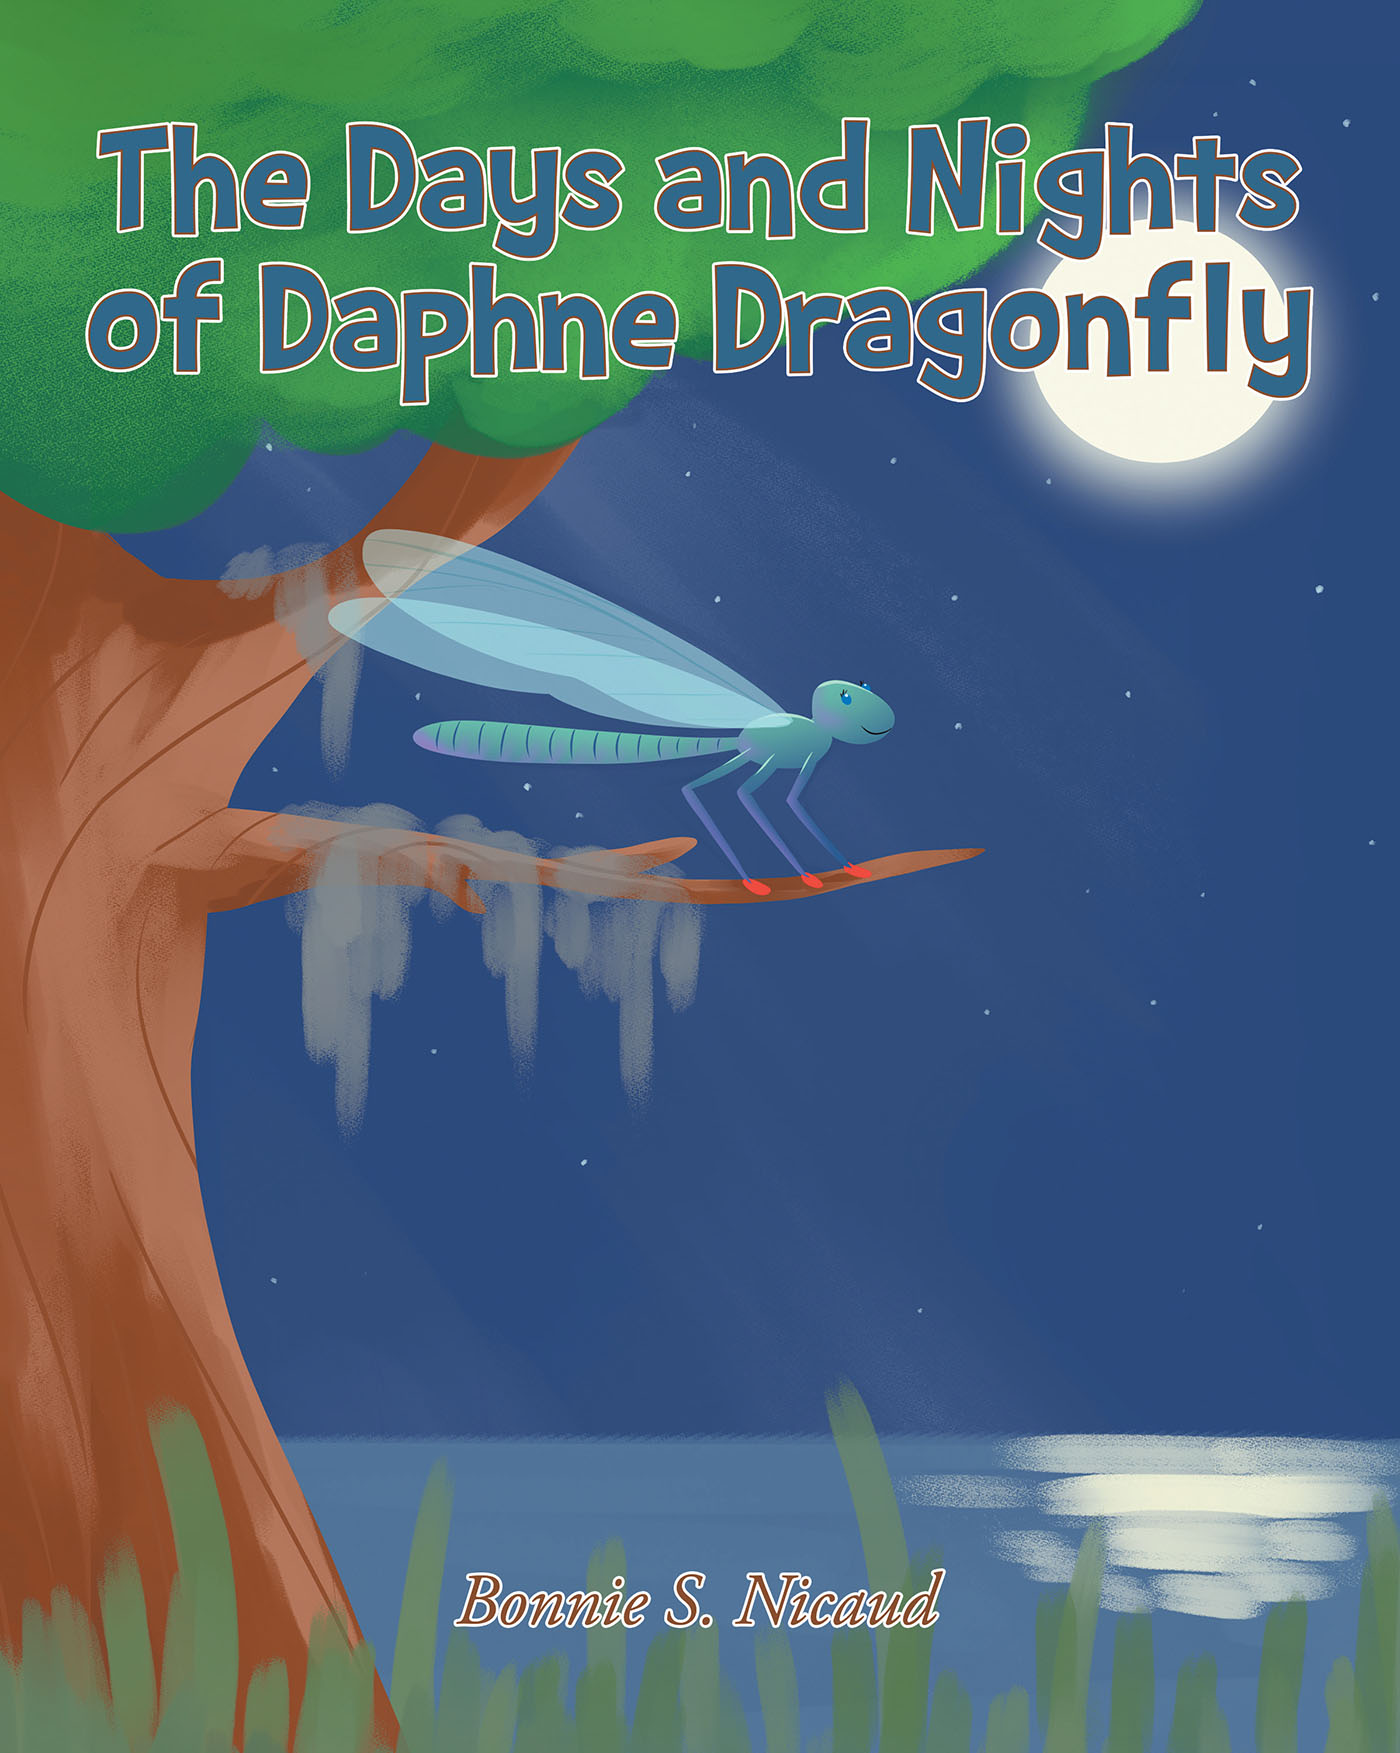 Bonnie S. Nicaud’s New Book, "The Days and Nights of Daphne Dragonfly," Follows an Inquisitive Dragonfly as She and Her Friends Explore the World Around Them